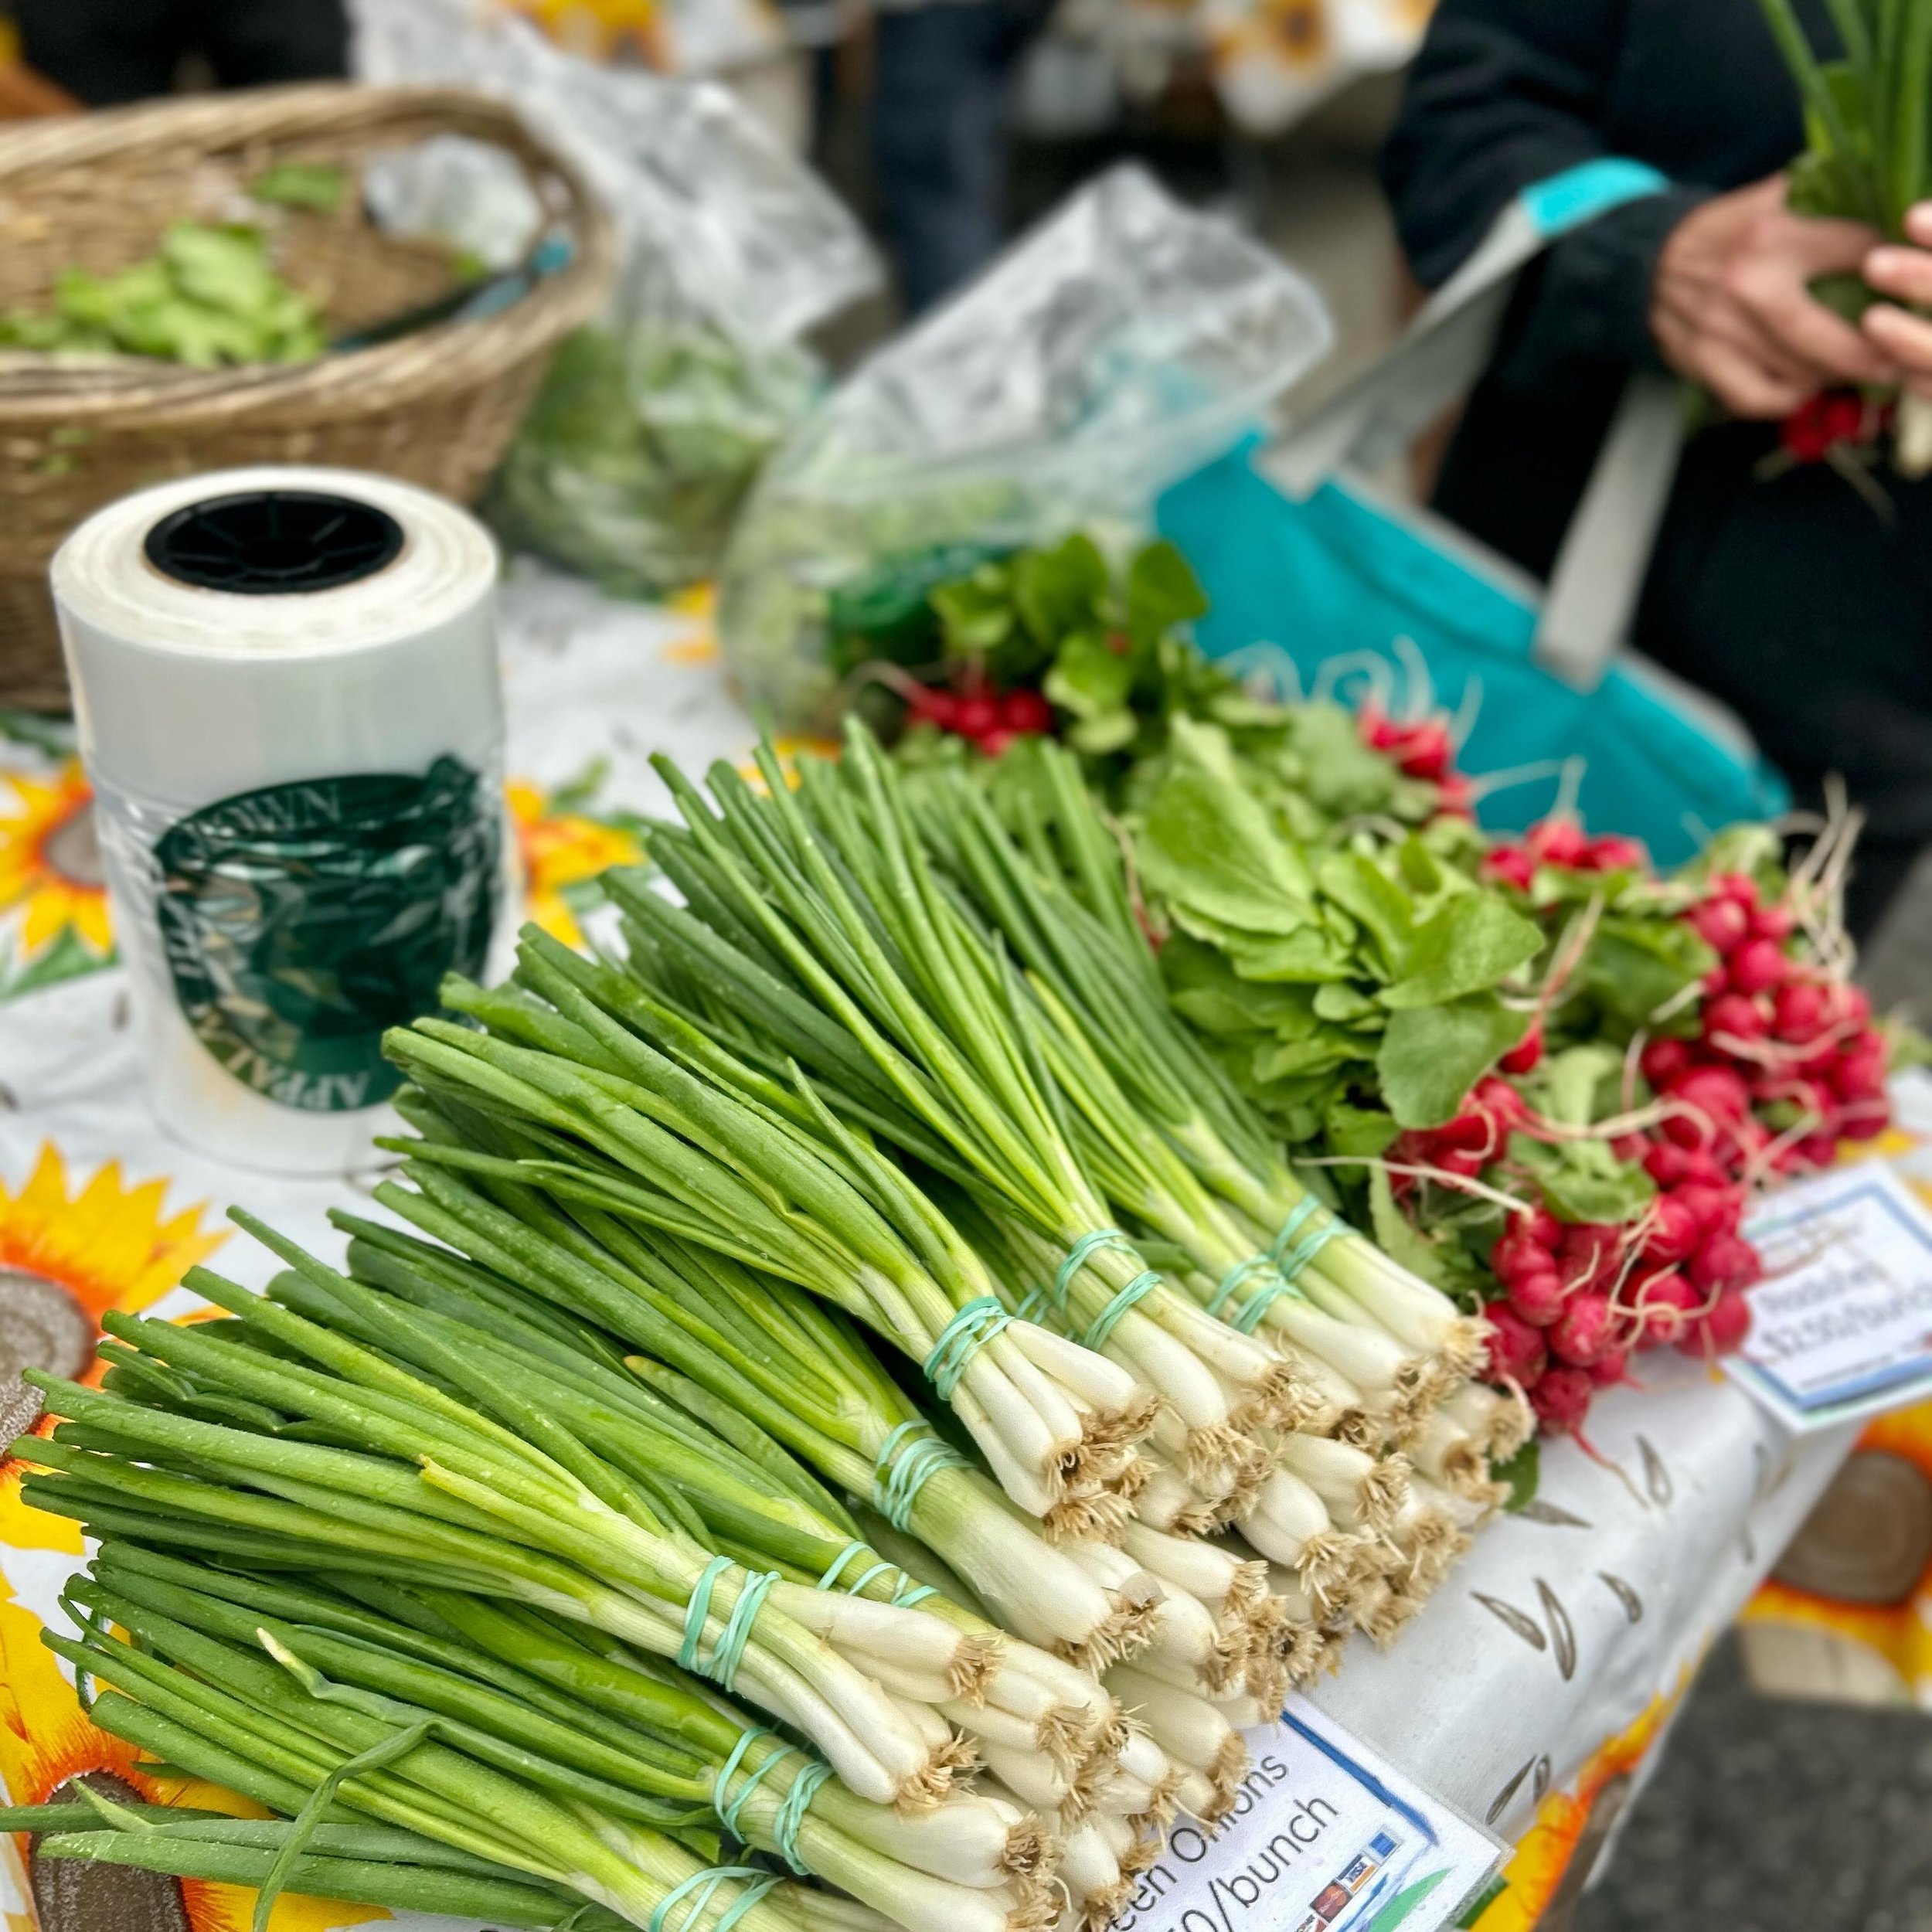 🌱🥕Thanks a bunch!!💐🙌

🙏We appreciate everyone who came out to support us at the farmers&rsquo; market yesterday! We had a bunch of fun meeting you all and sharing our farm-fresh goodies! 🥒

👩&zwj;🌾👨&zwj;🎨👨&zwj;🍳We couldn&rsquo;t ask for a